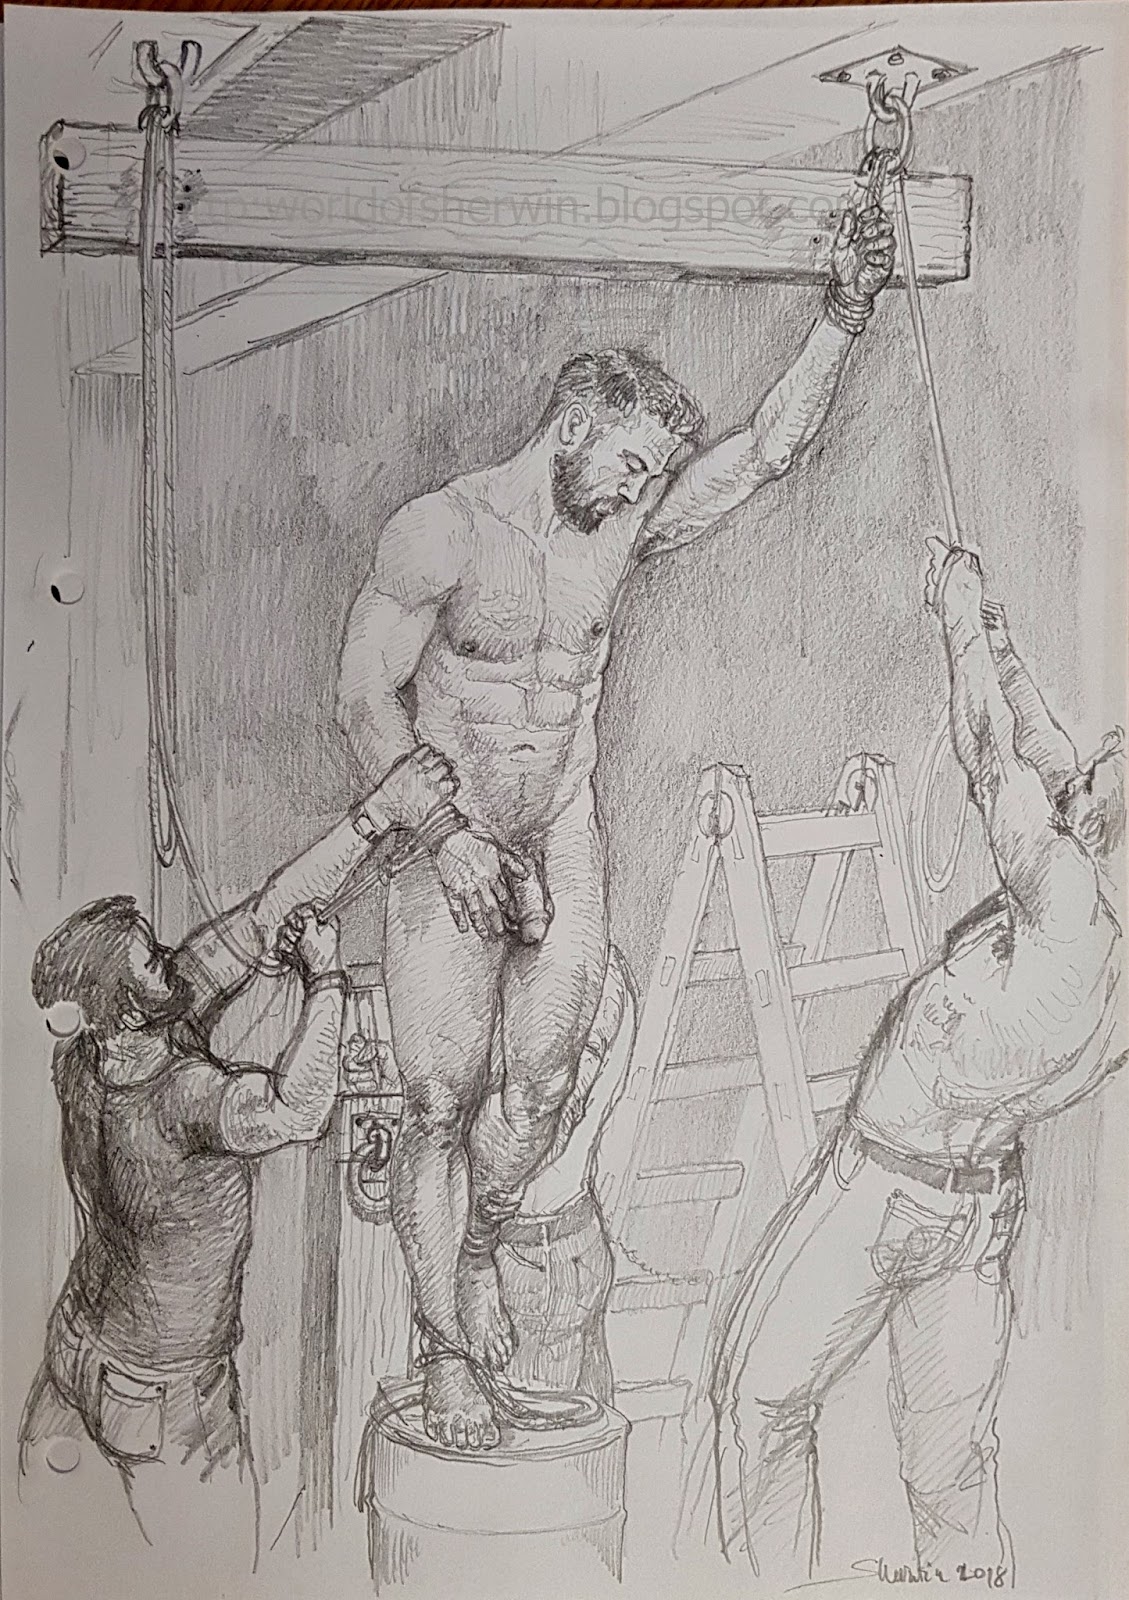 A drawing of a man in bondage